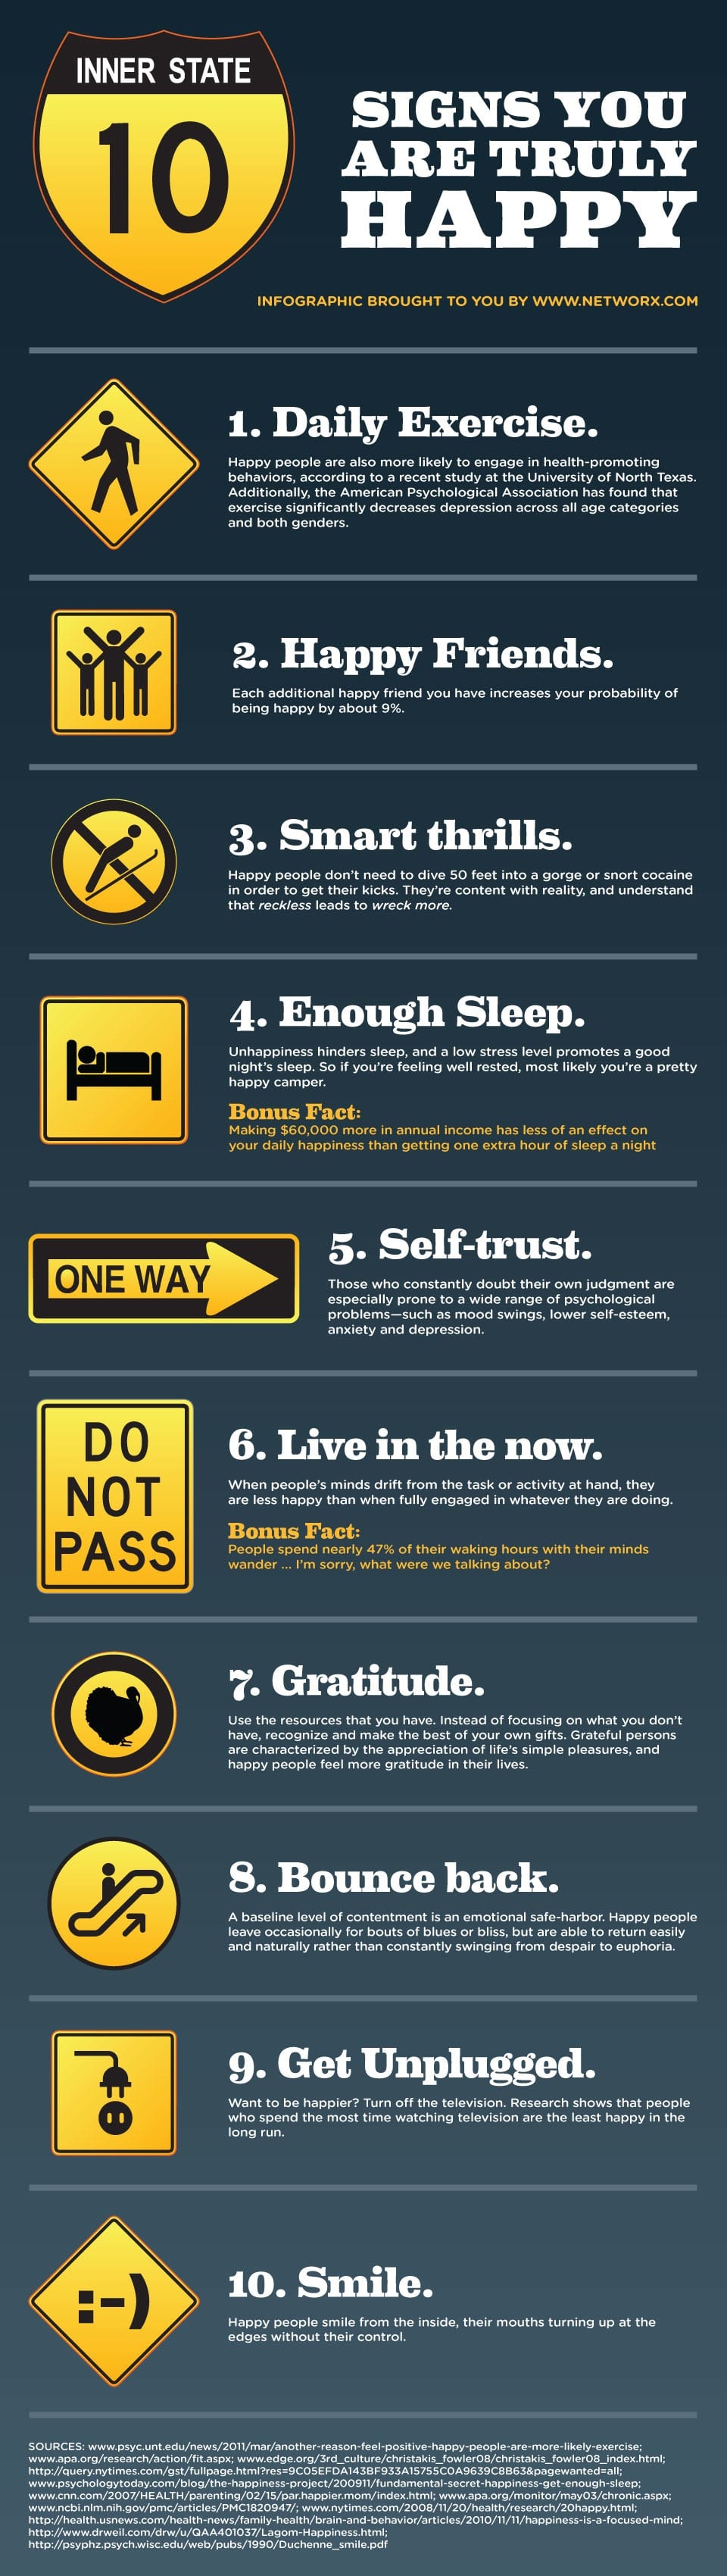 signs-you-are-happy-infographic